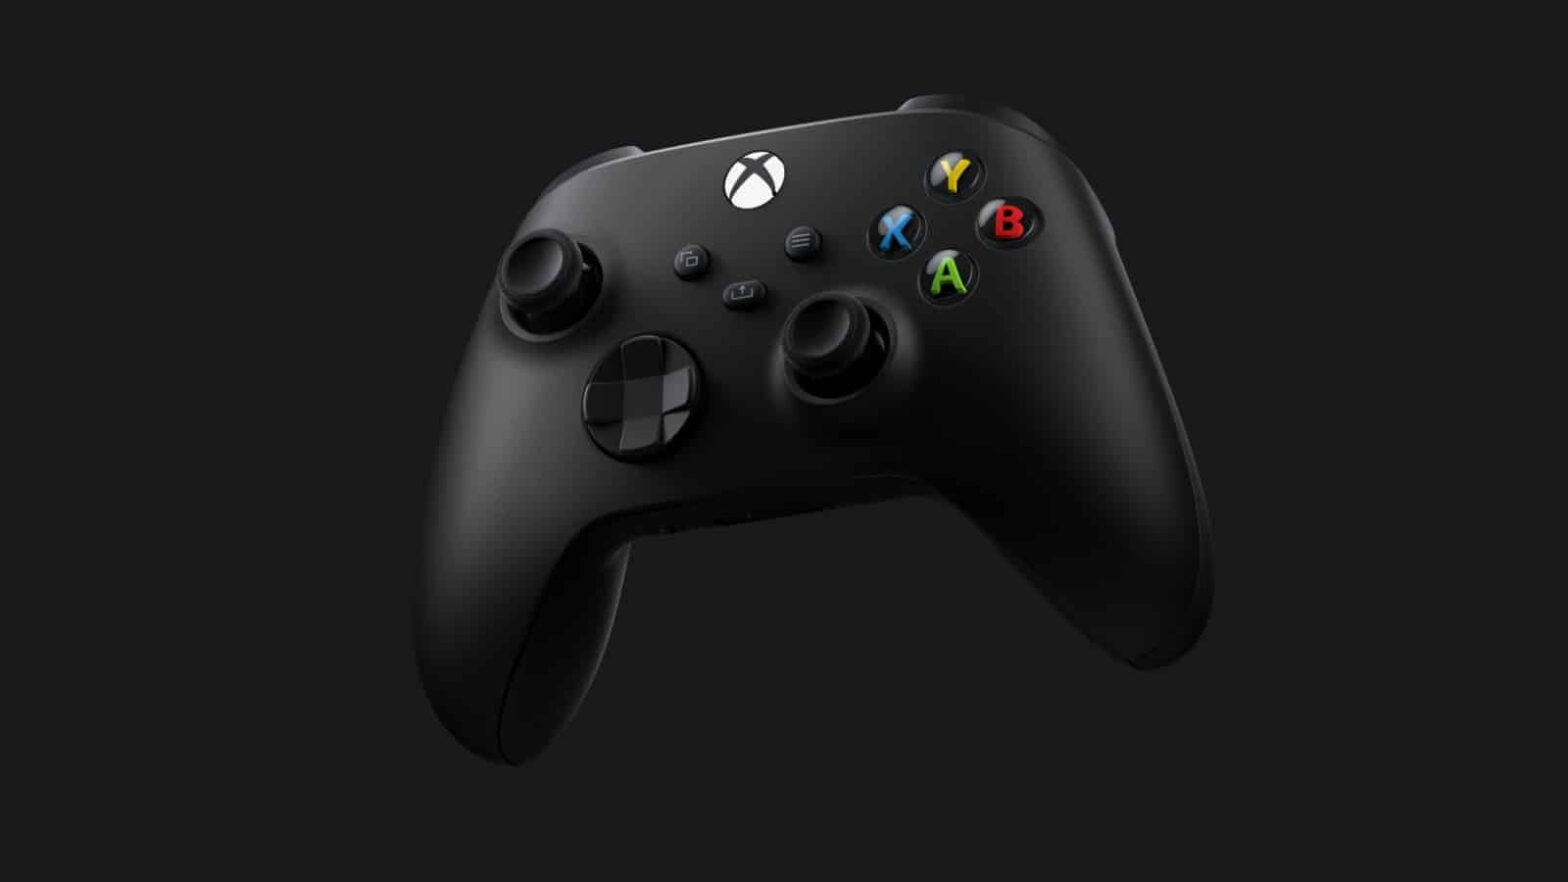 The Xbox Wireless controller is on sale for as low as $44